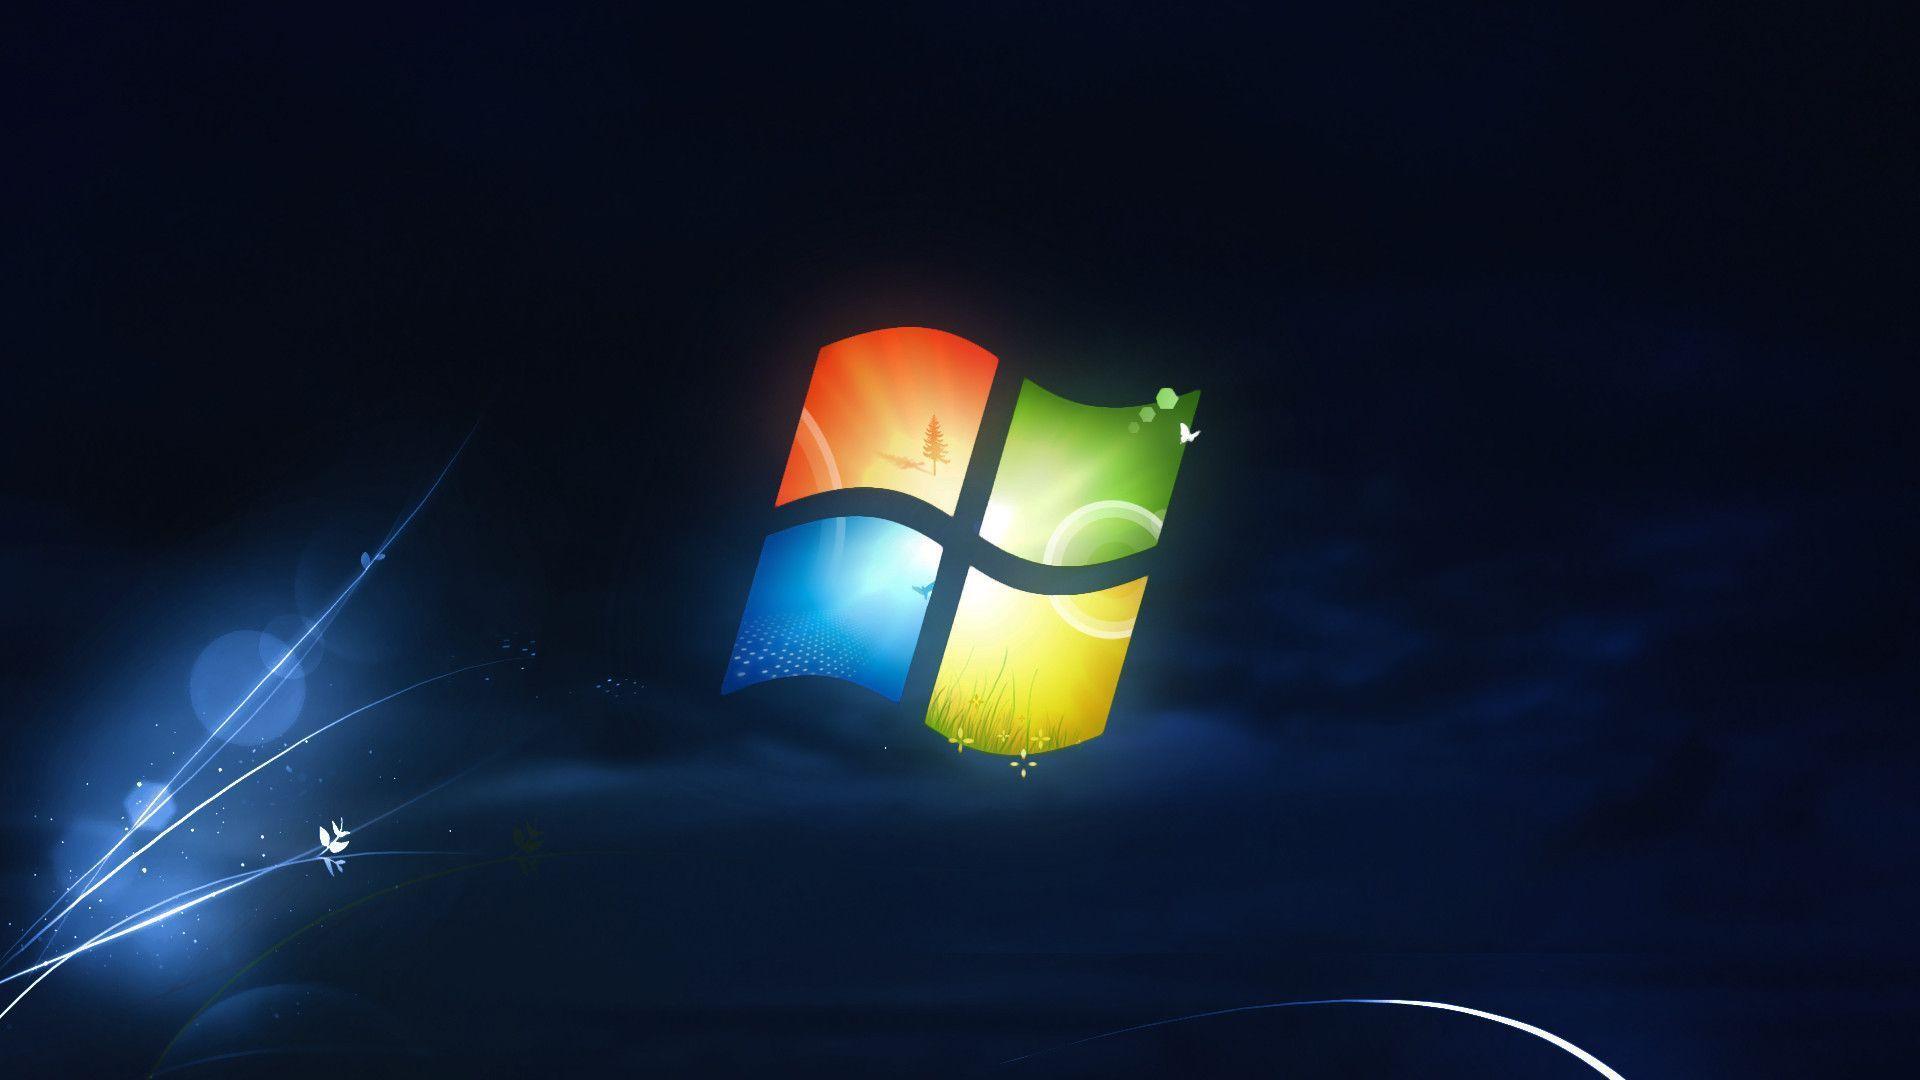 Microsoft Backgrounds 1 2015 HD Wallpapers